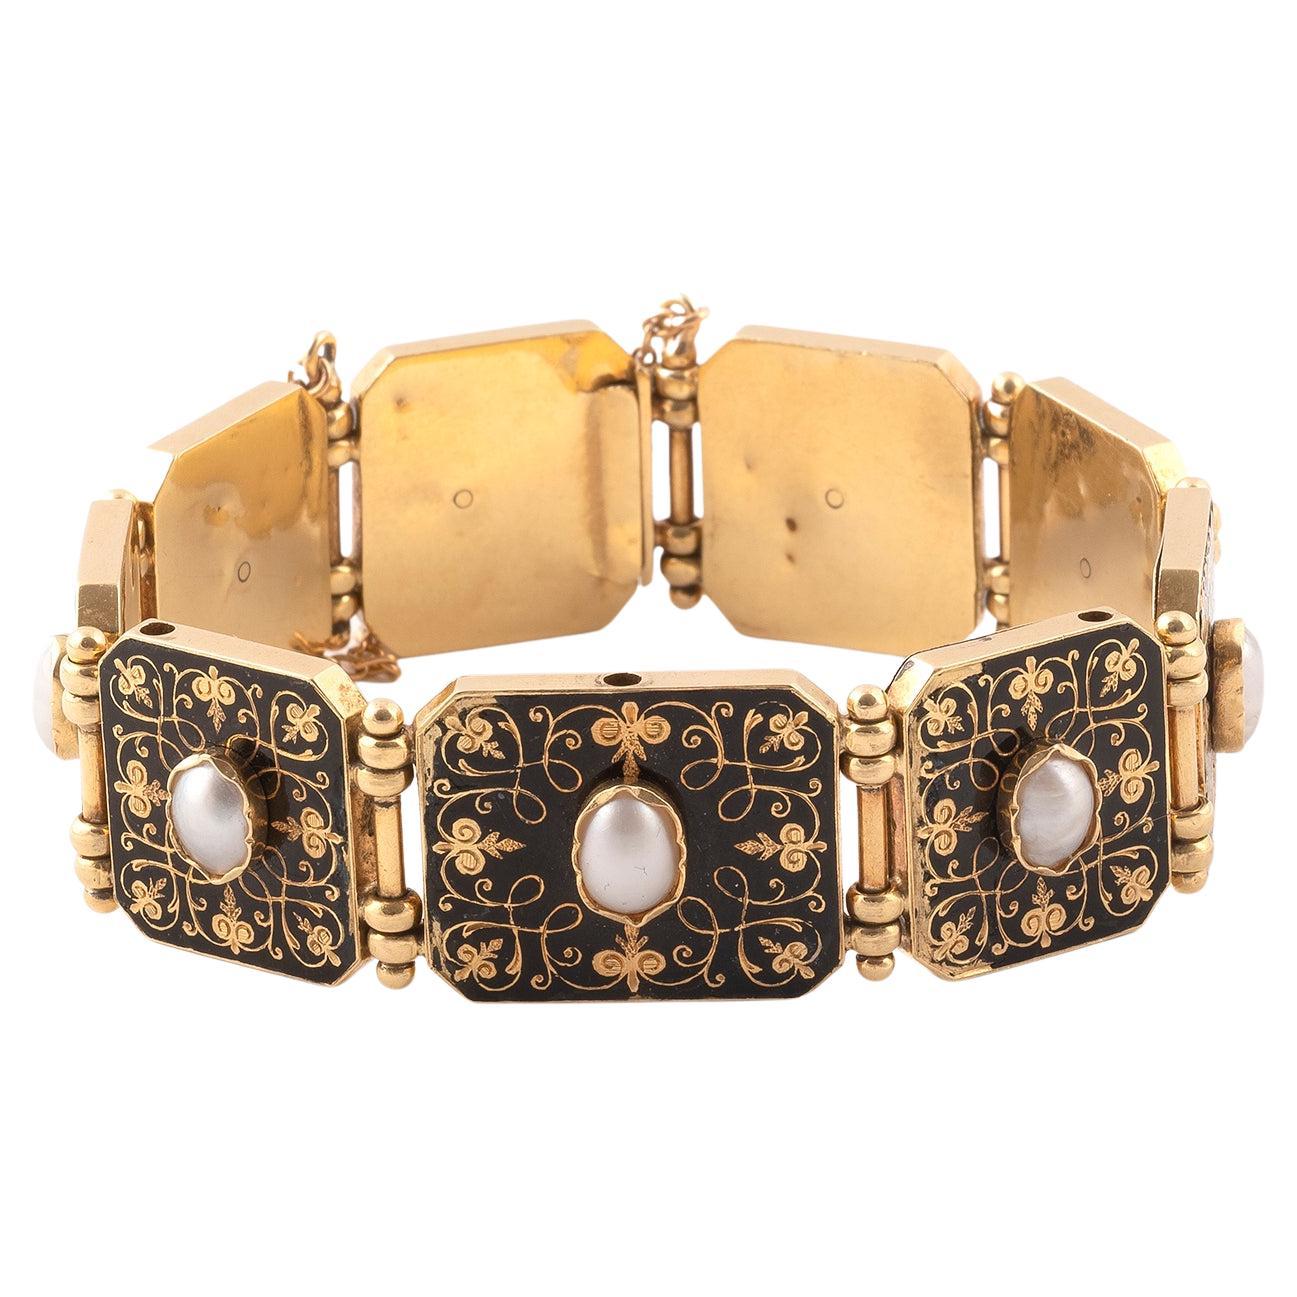 Bracelet composed of a succession of square links, in the center a  fine white natural pearl in a vegetable decoration engraved on black enamel. Possibility of adding in the center of the bracelet, by a sliding system, a black enamelled circle,